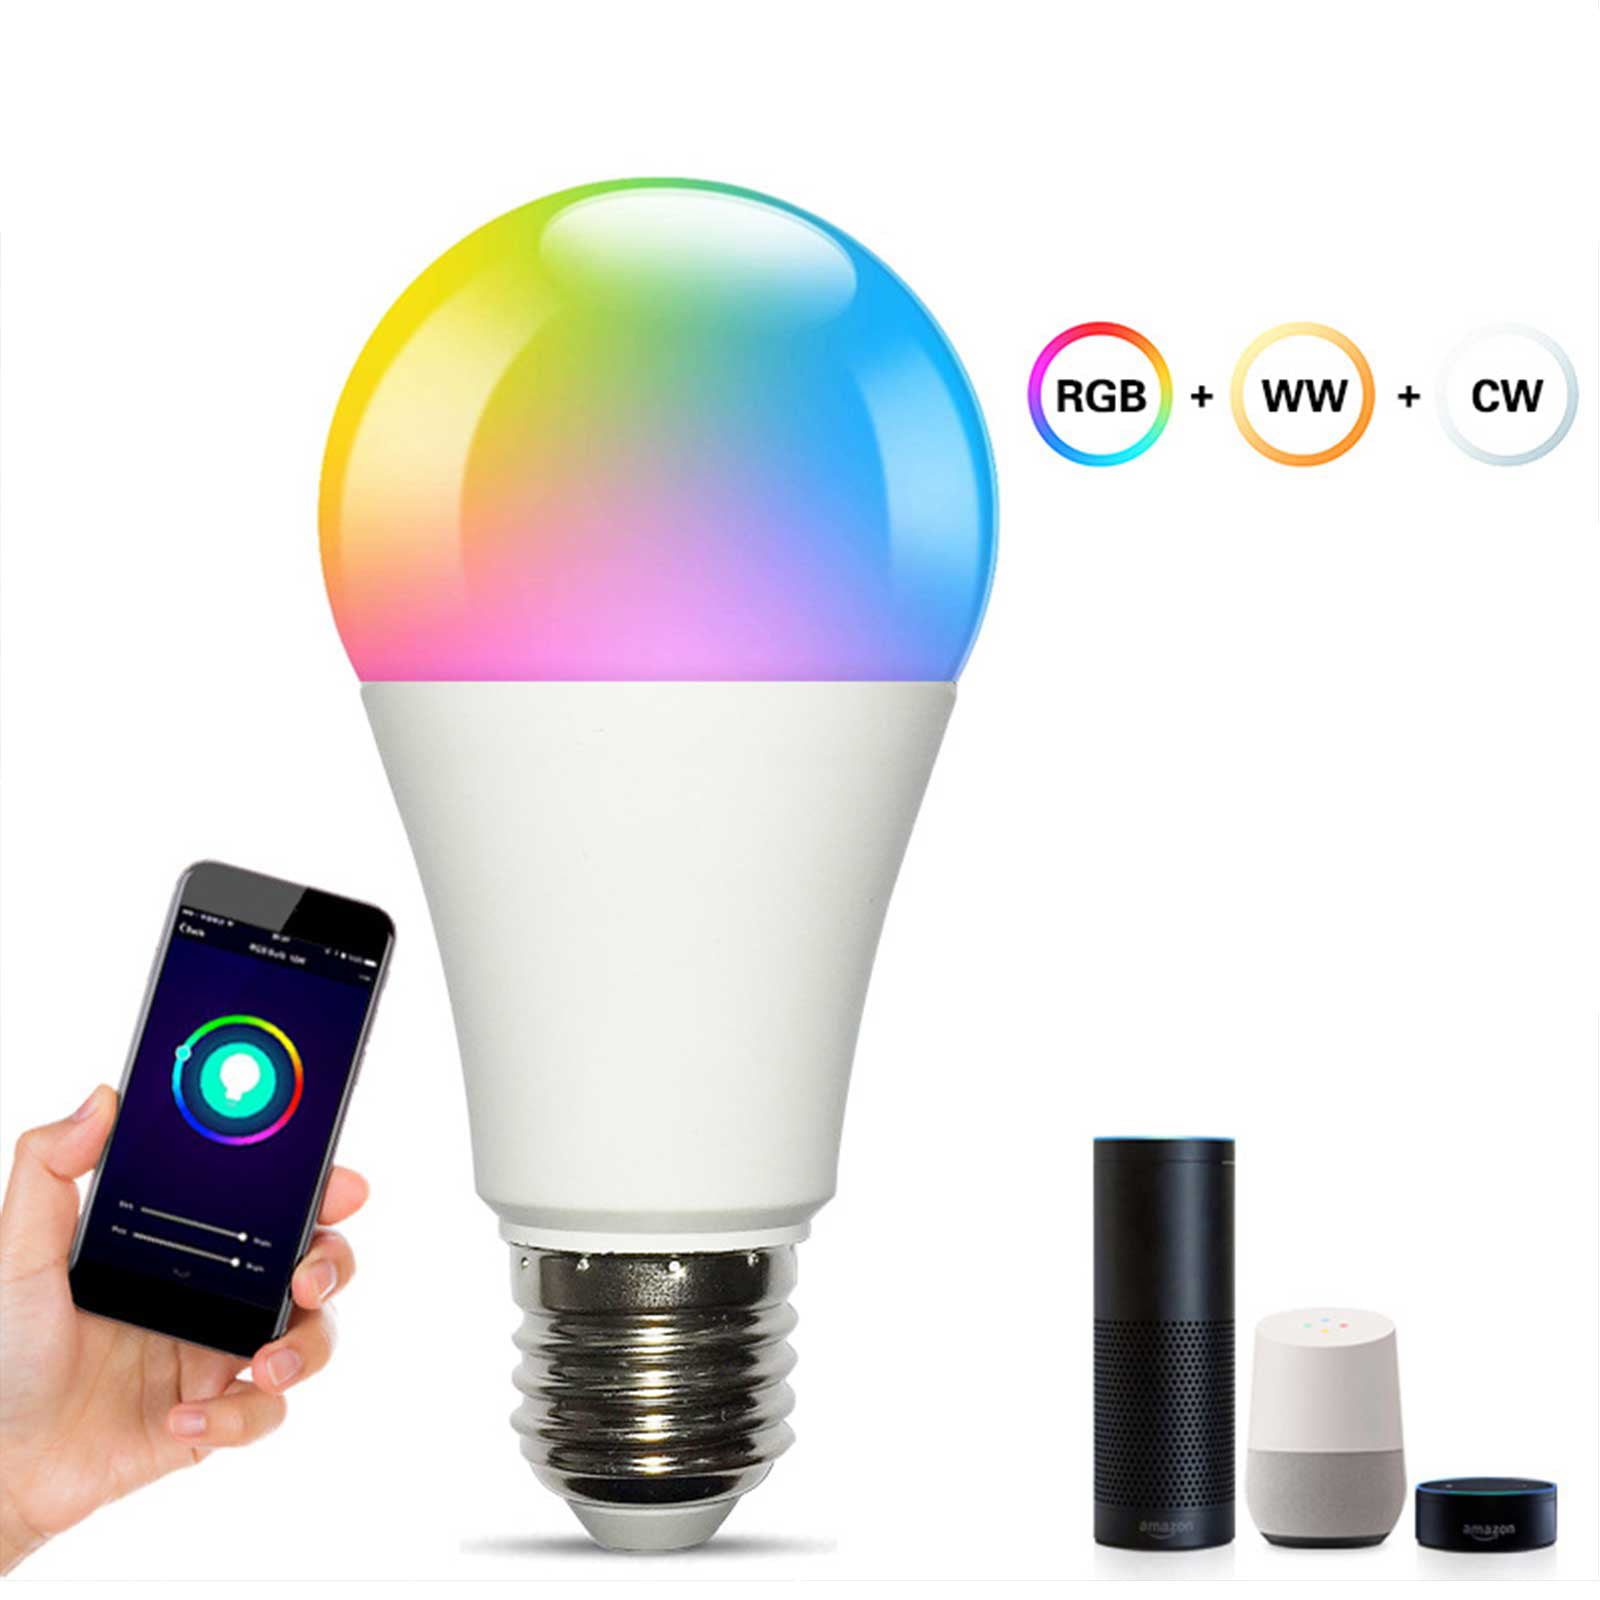 Details about   Smart WiFI Remote Control Voice Bulb Dimmable 16 Million Color RGB+W Home 